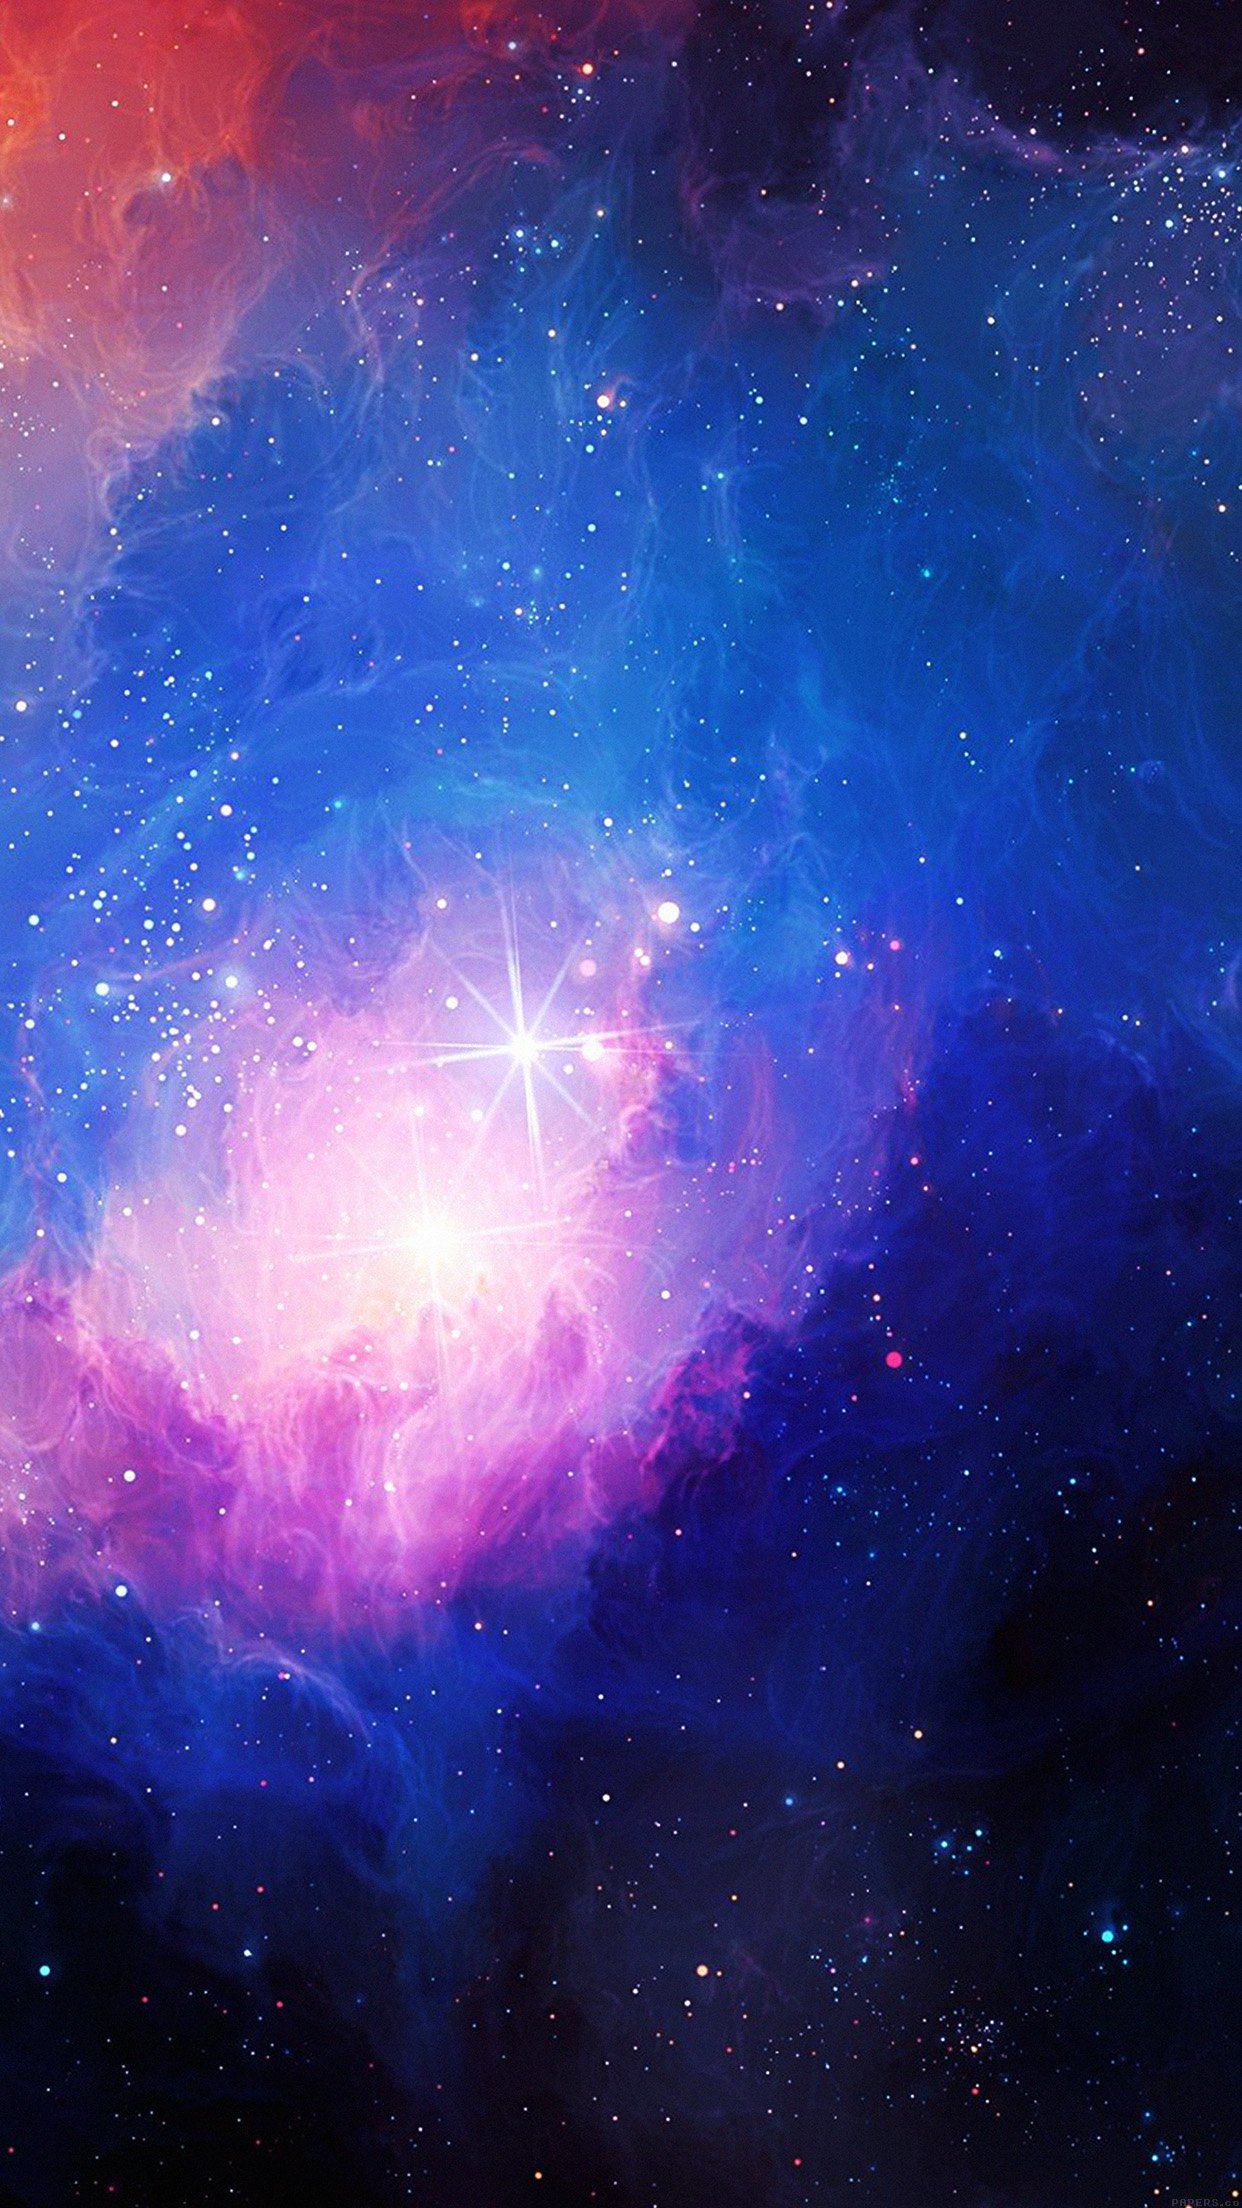 Gorgeous Galaxy Wallpaper For iPhone And iPad